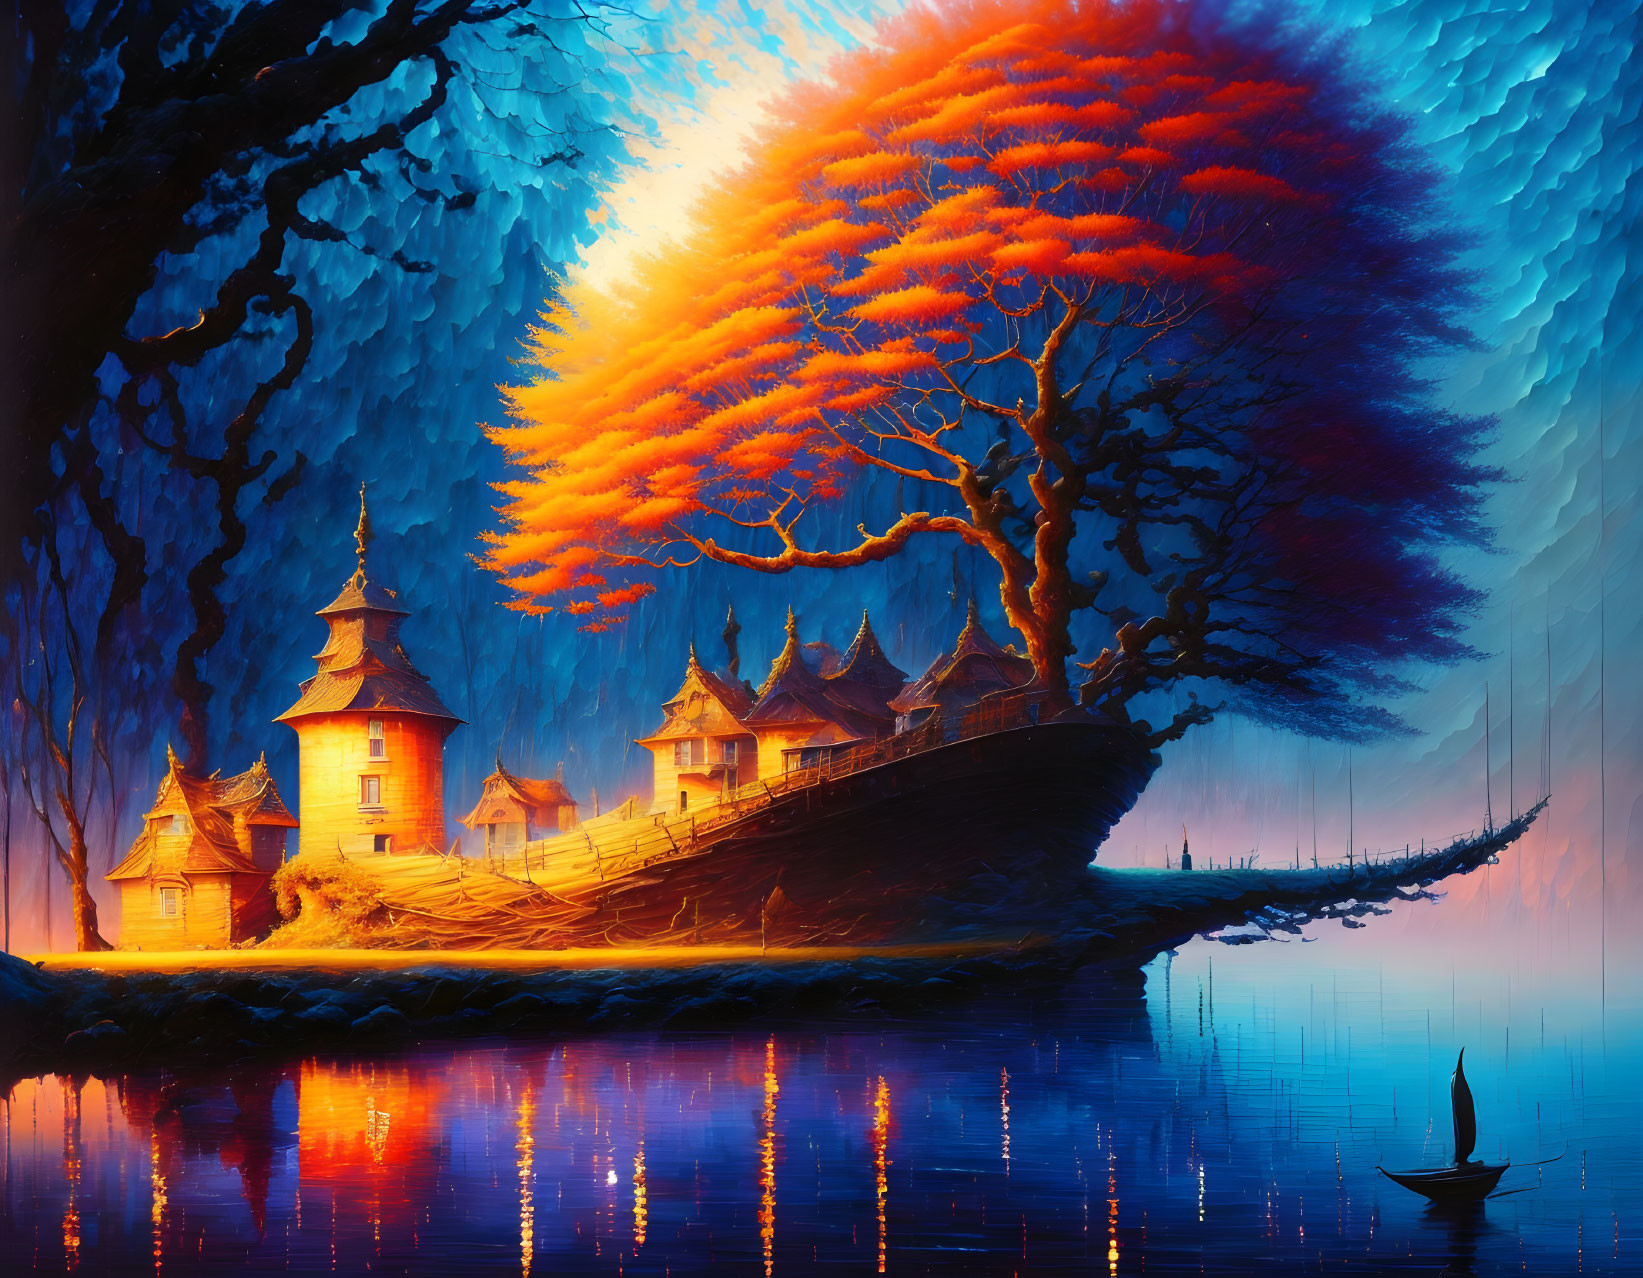 Fantastical ship-like treehouse painting under red tree canopy